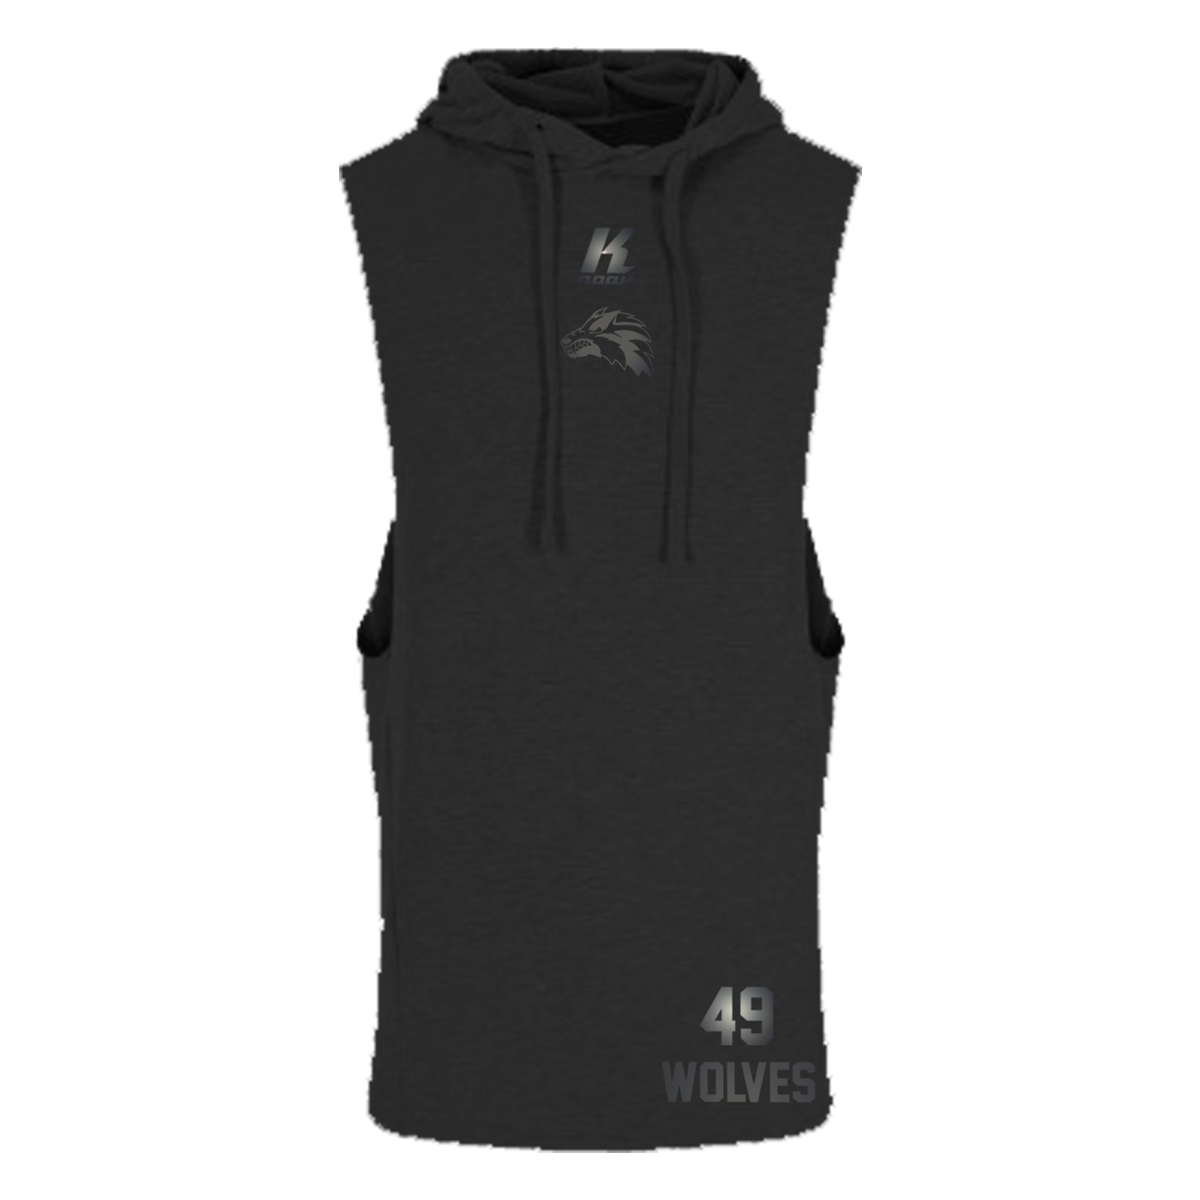 Wolves "Blackline" Sleeveless Muscle Hoodie JC053 with Playernumber or Initials